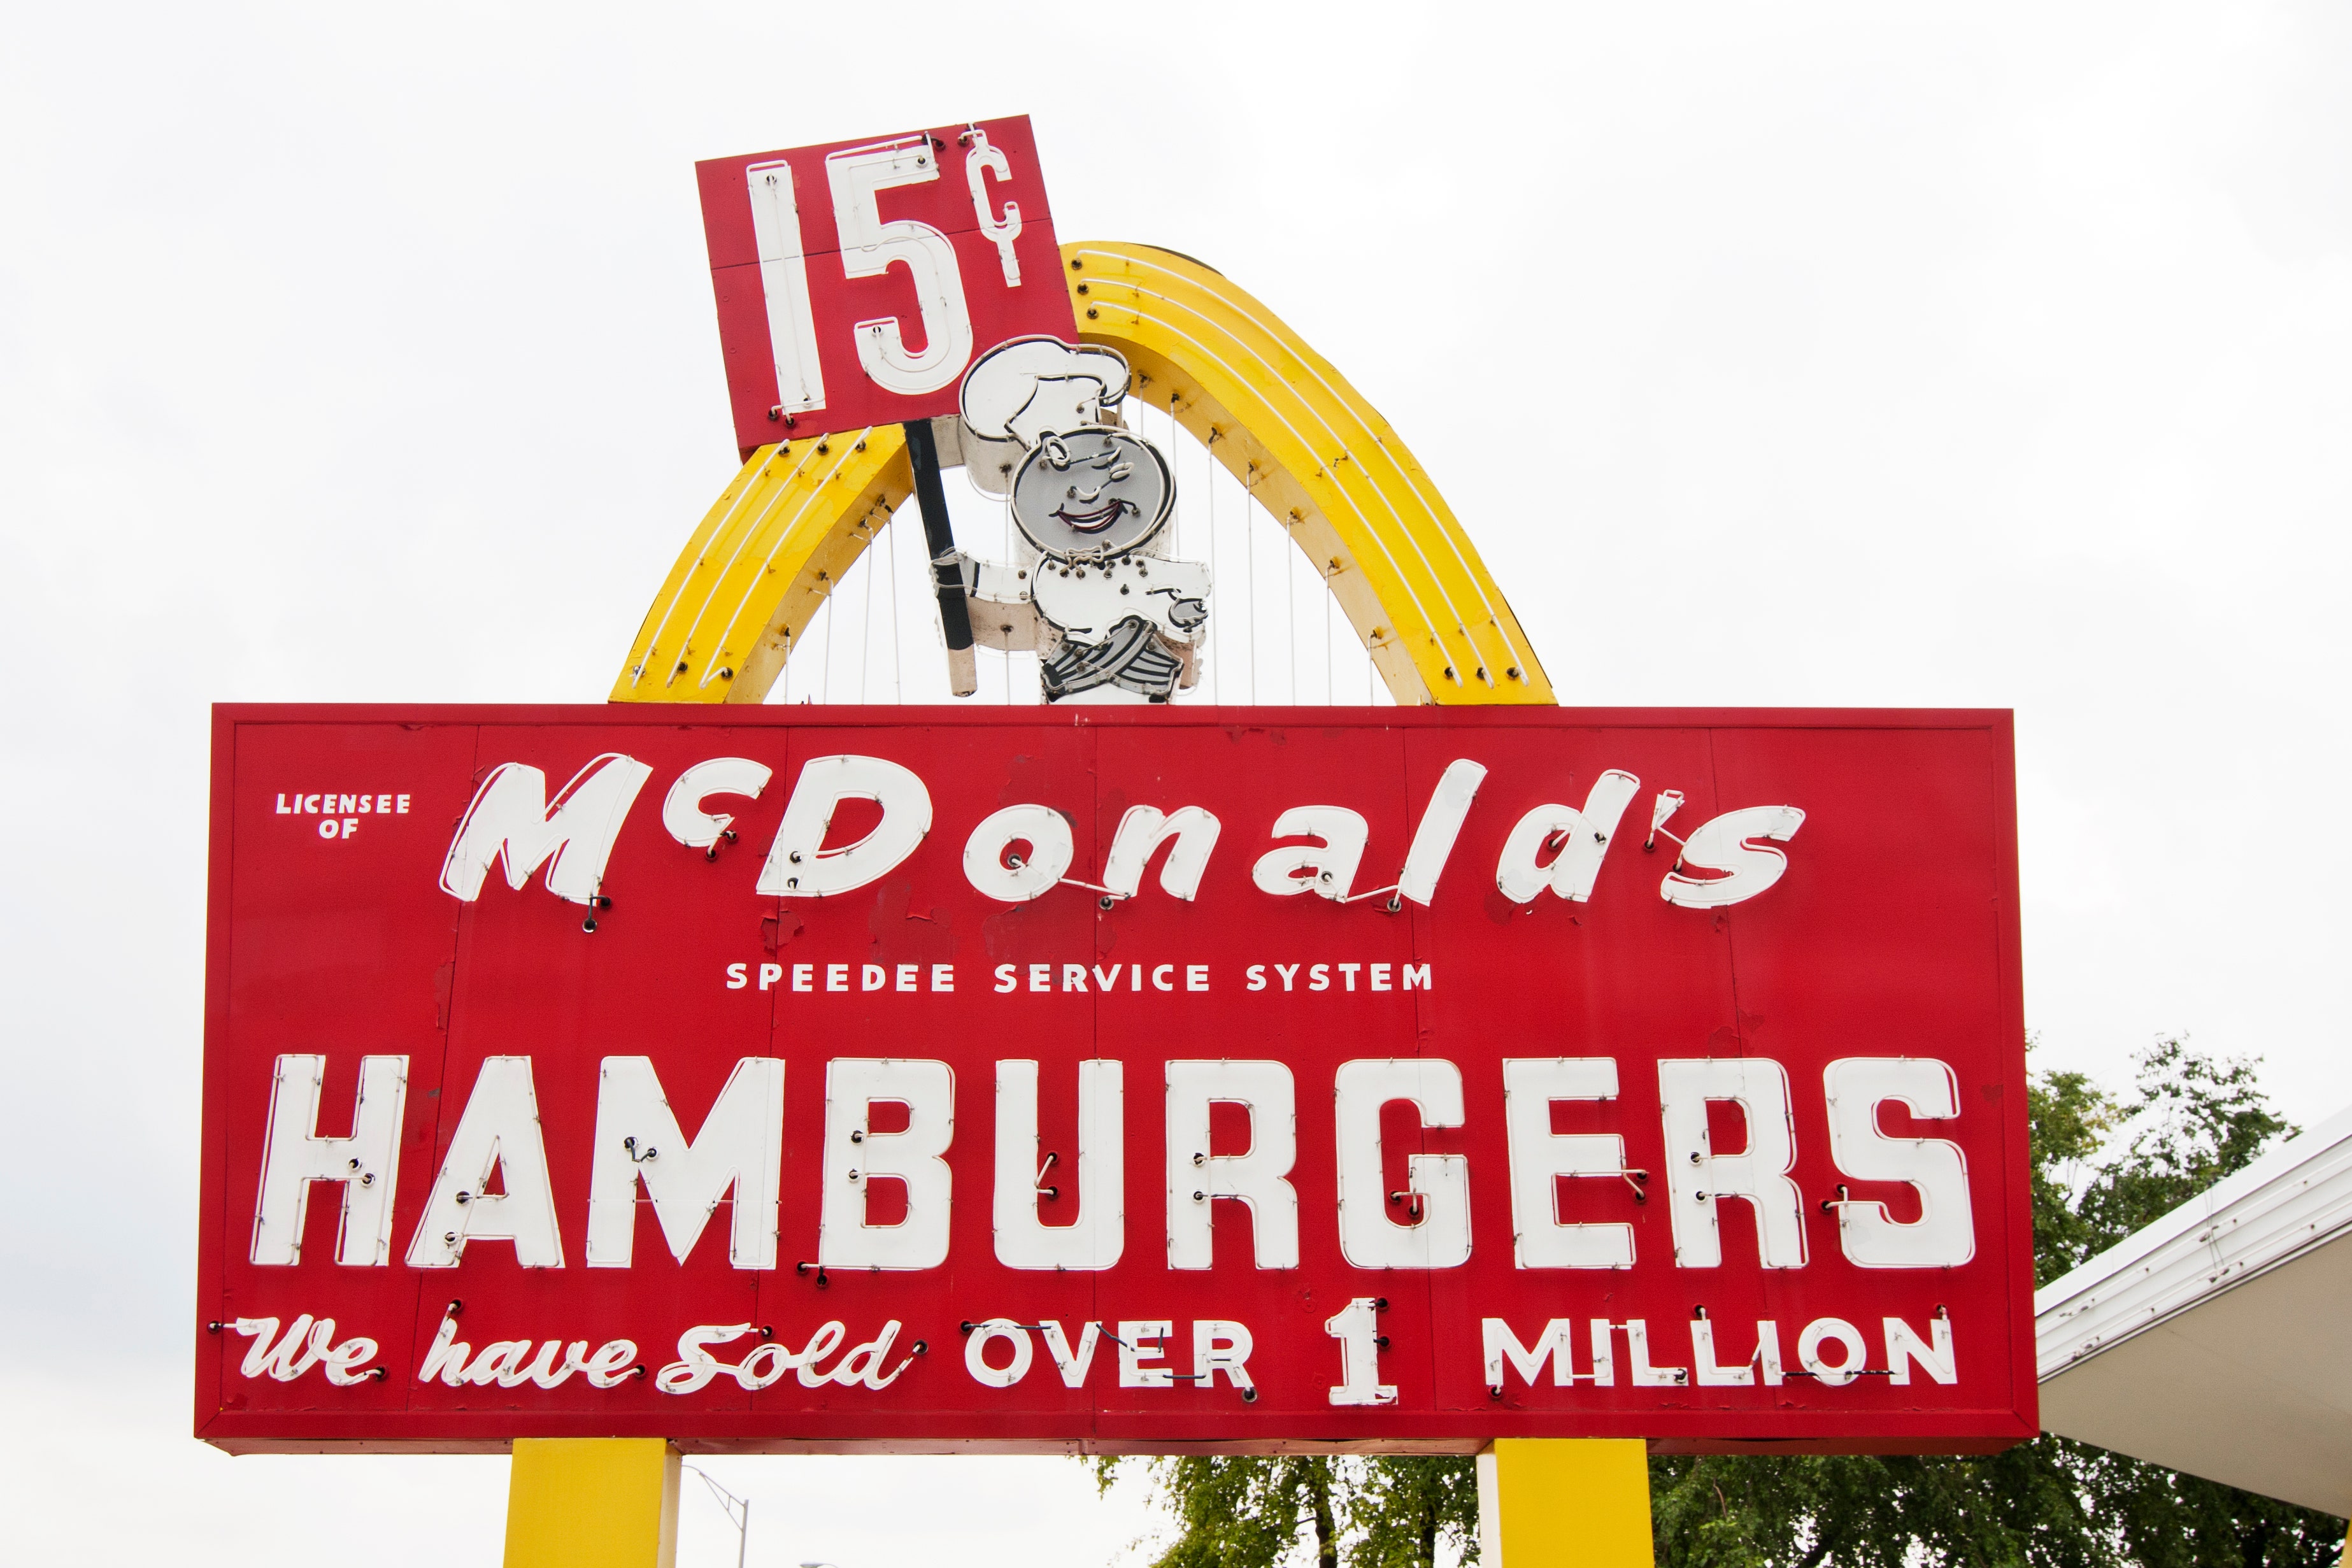 McDonald's starts 'throwback' Thursday deals, offering cheeseburgers, shakes for $0.25